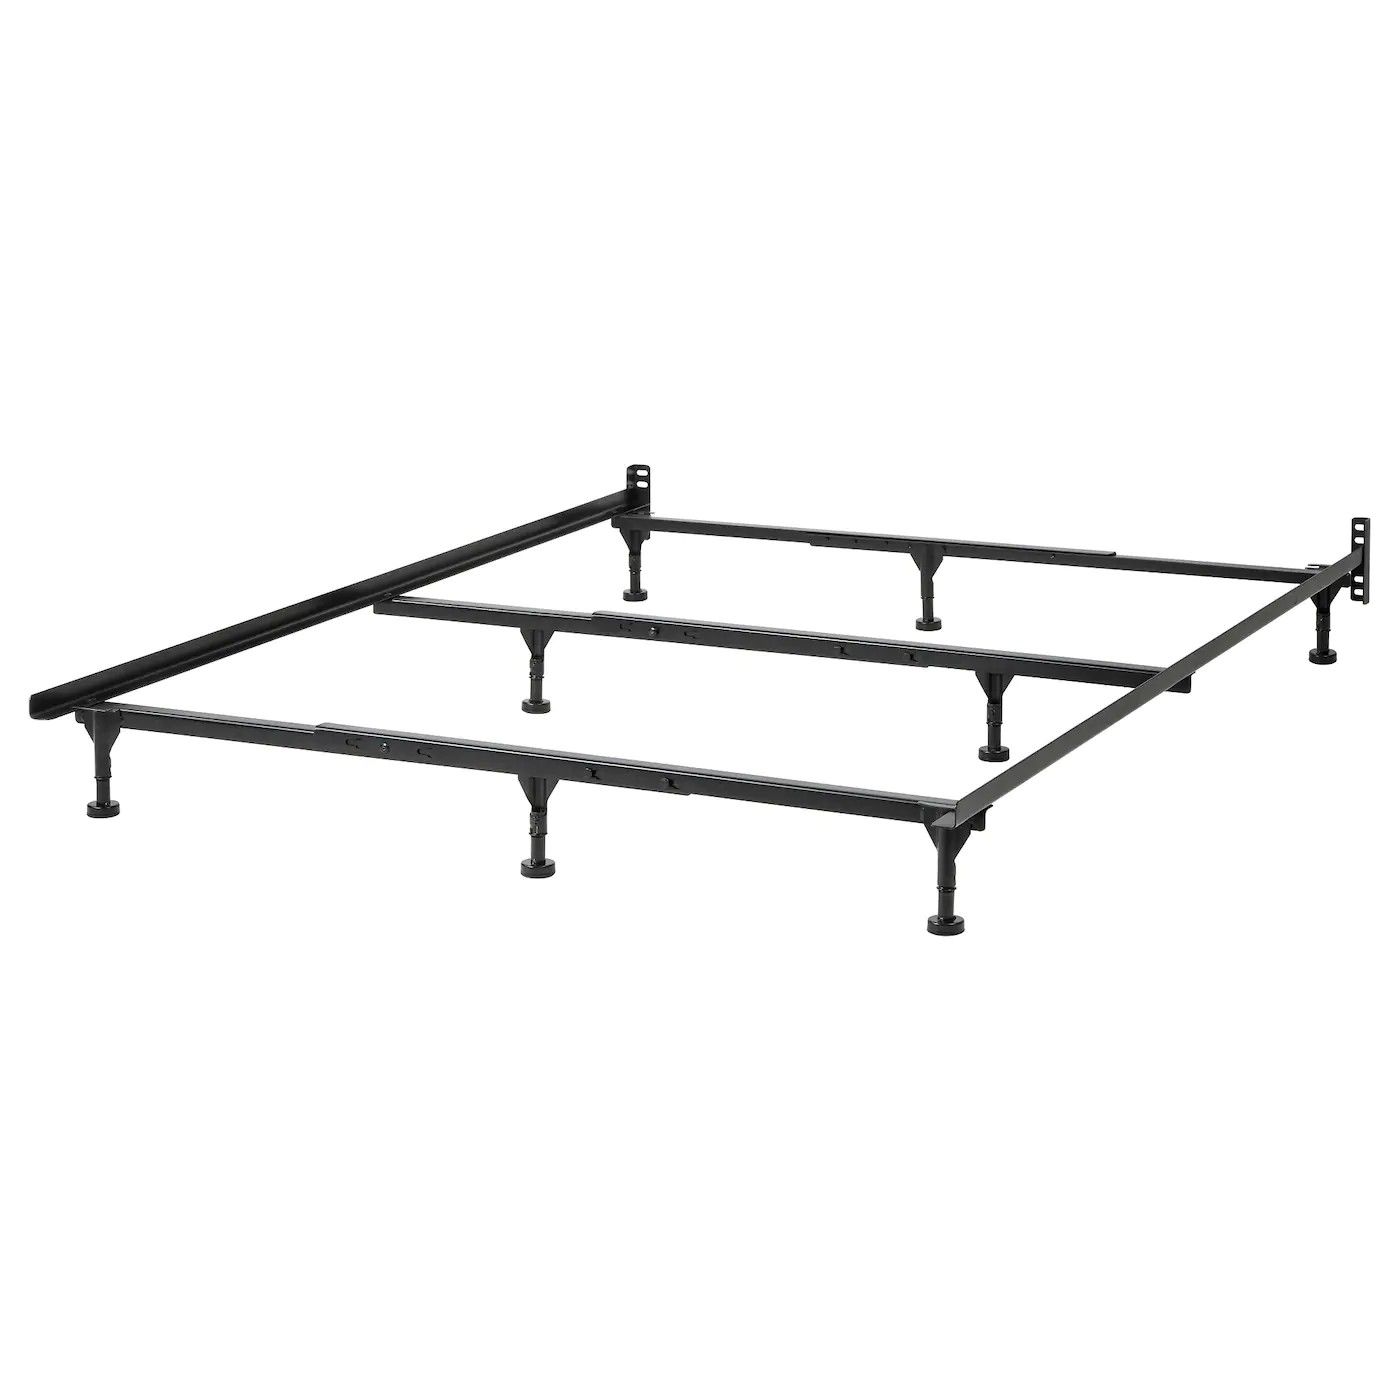 IKEA FEIRING Bed frame with legs metal Queen or King